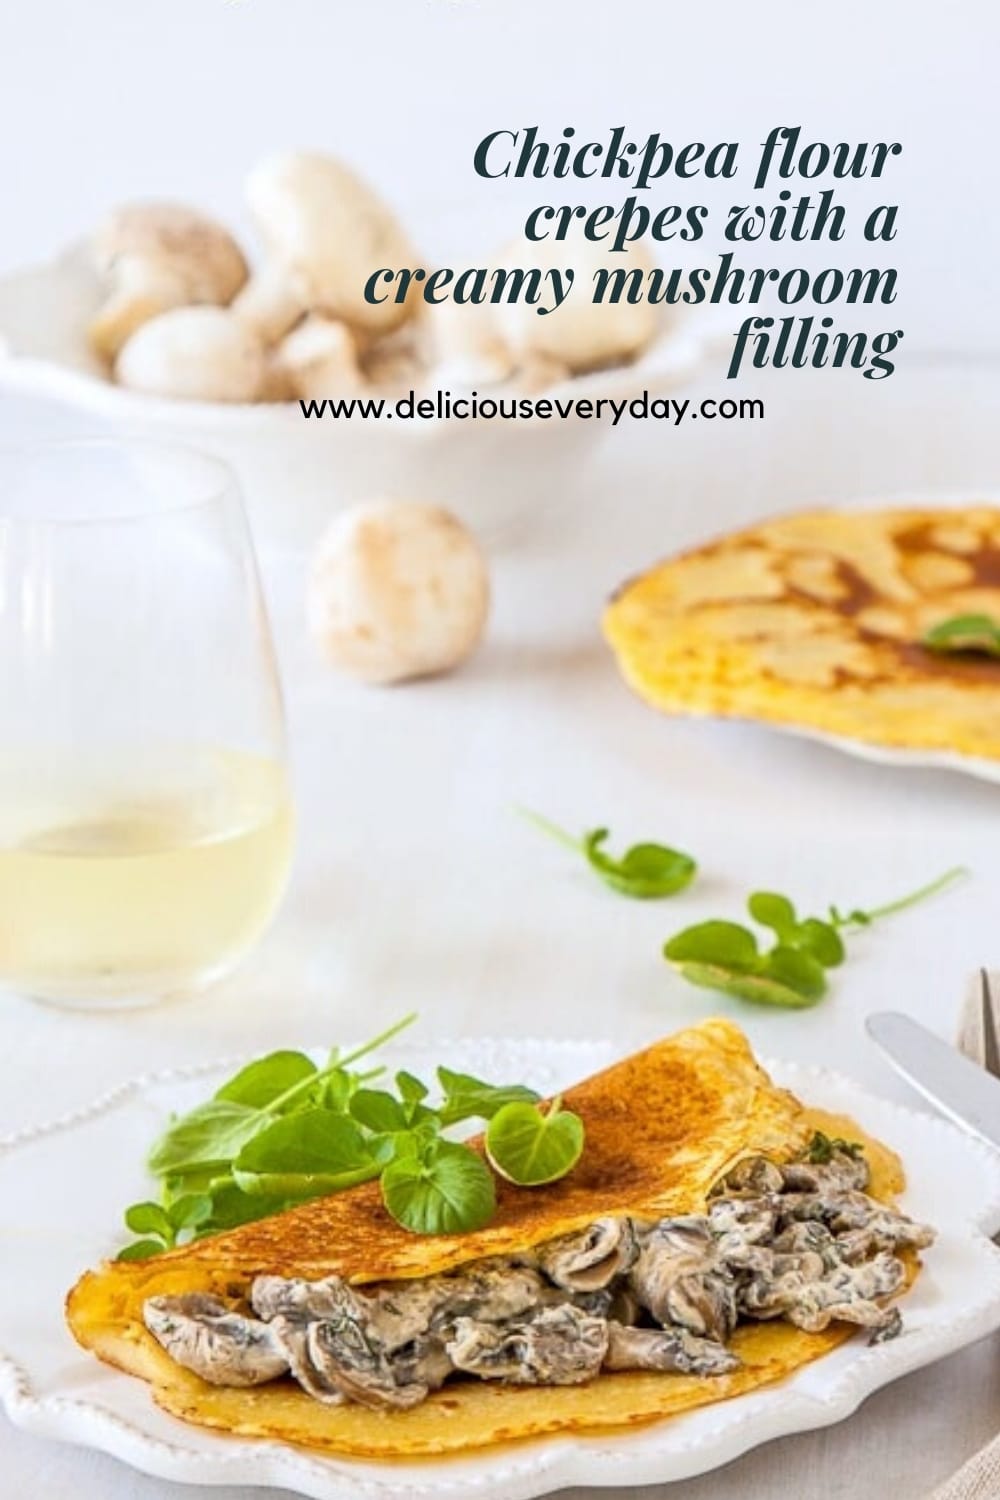 Chickpea flour crepes with a creamy mushroom filling